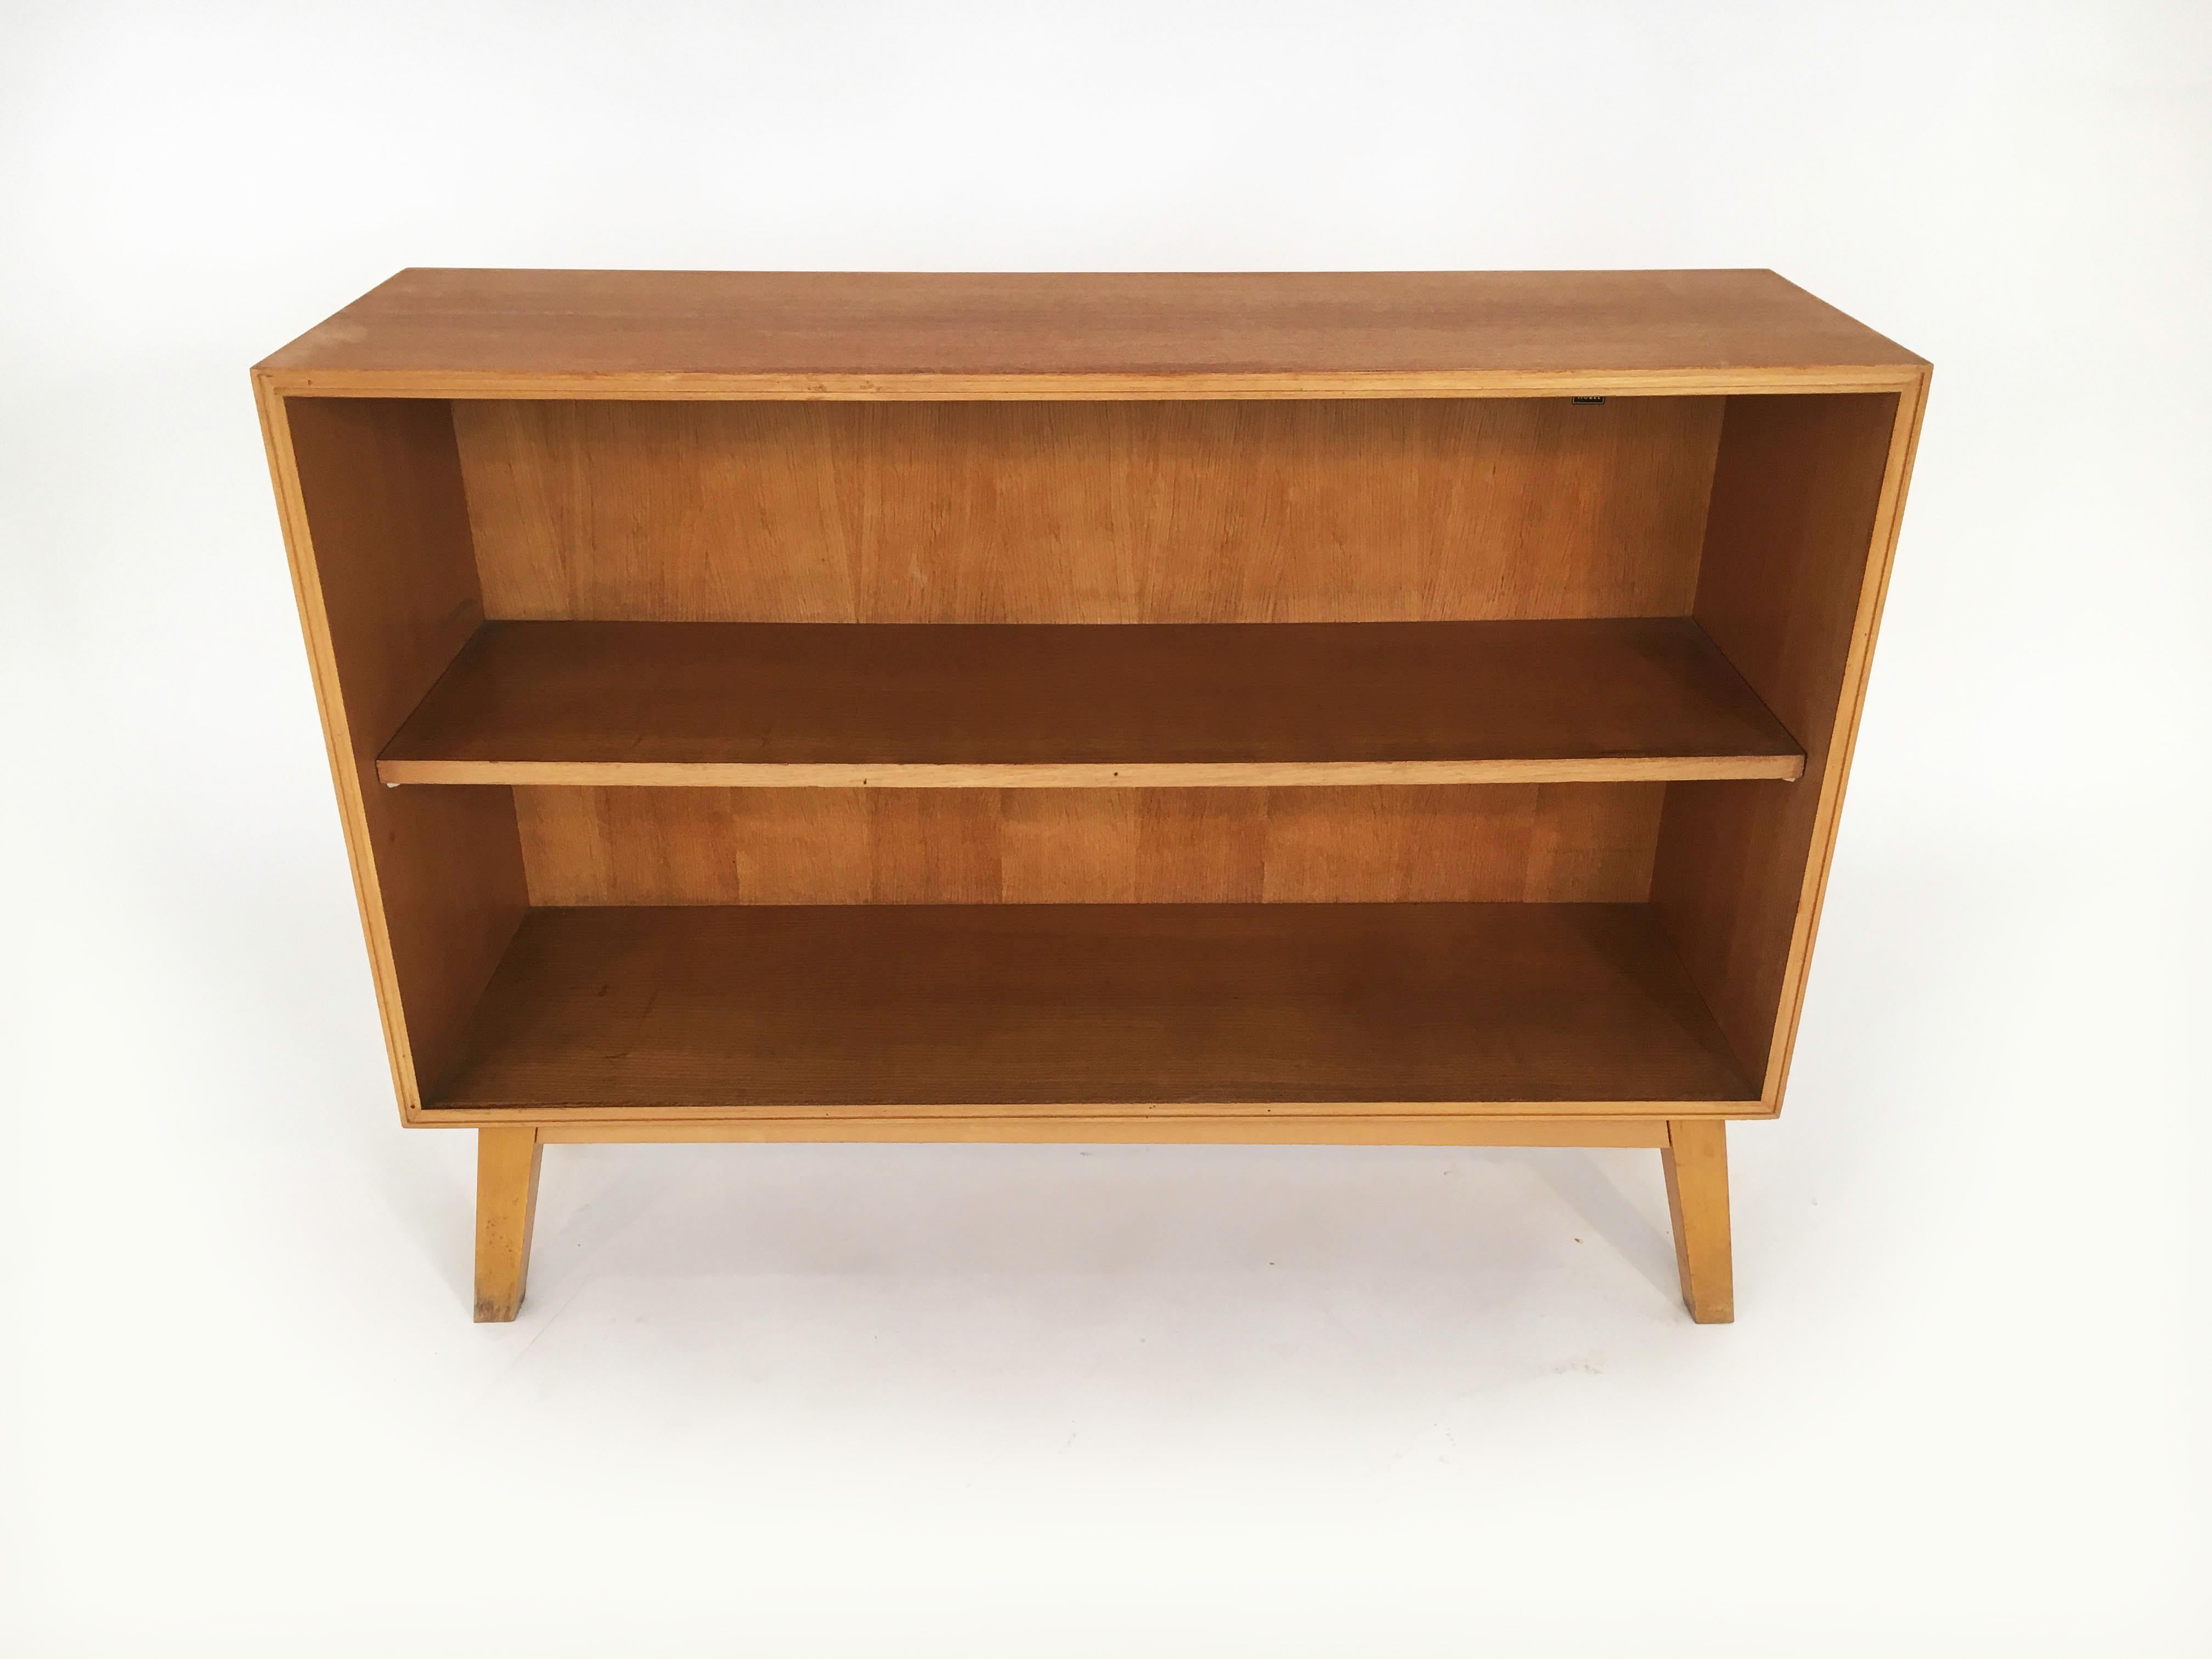 SW Möbel bookcase, Vienna, 1950s. SW Möbel sideboard, chest of drawers, bookcase collection, Vienna, 1950s. SW Möbel (Soziale Wohnkultur) was a furniture brand of the 1950s, created to provide modern functional furniture at affordable prices for